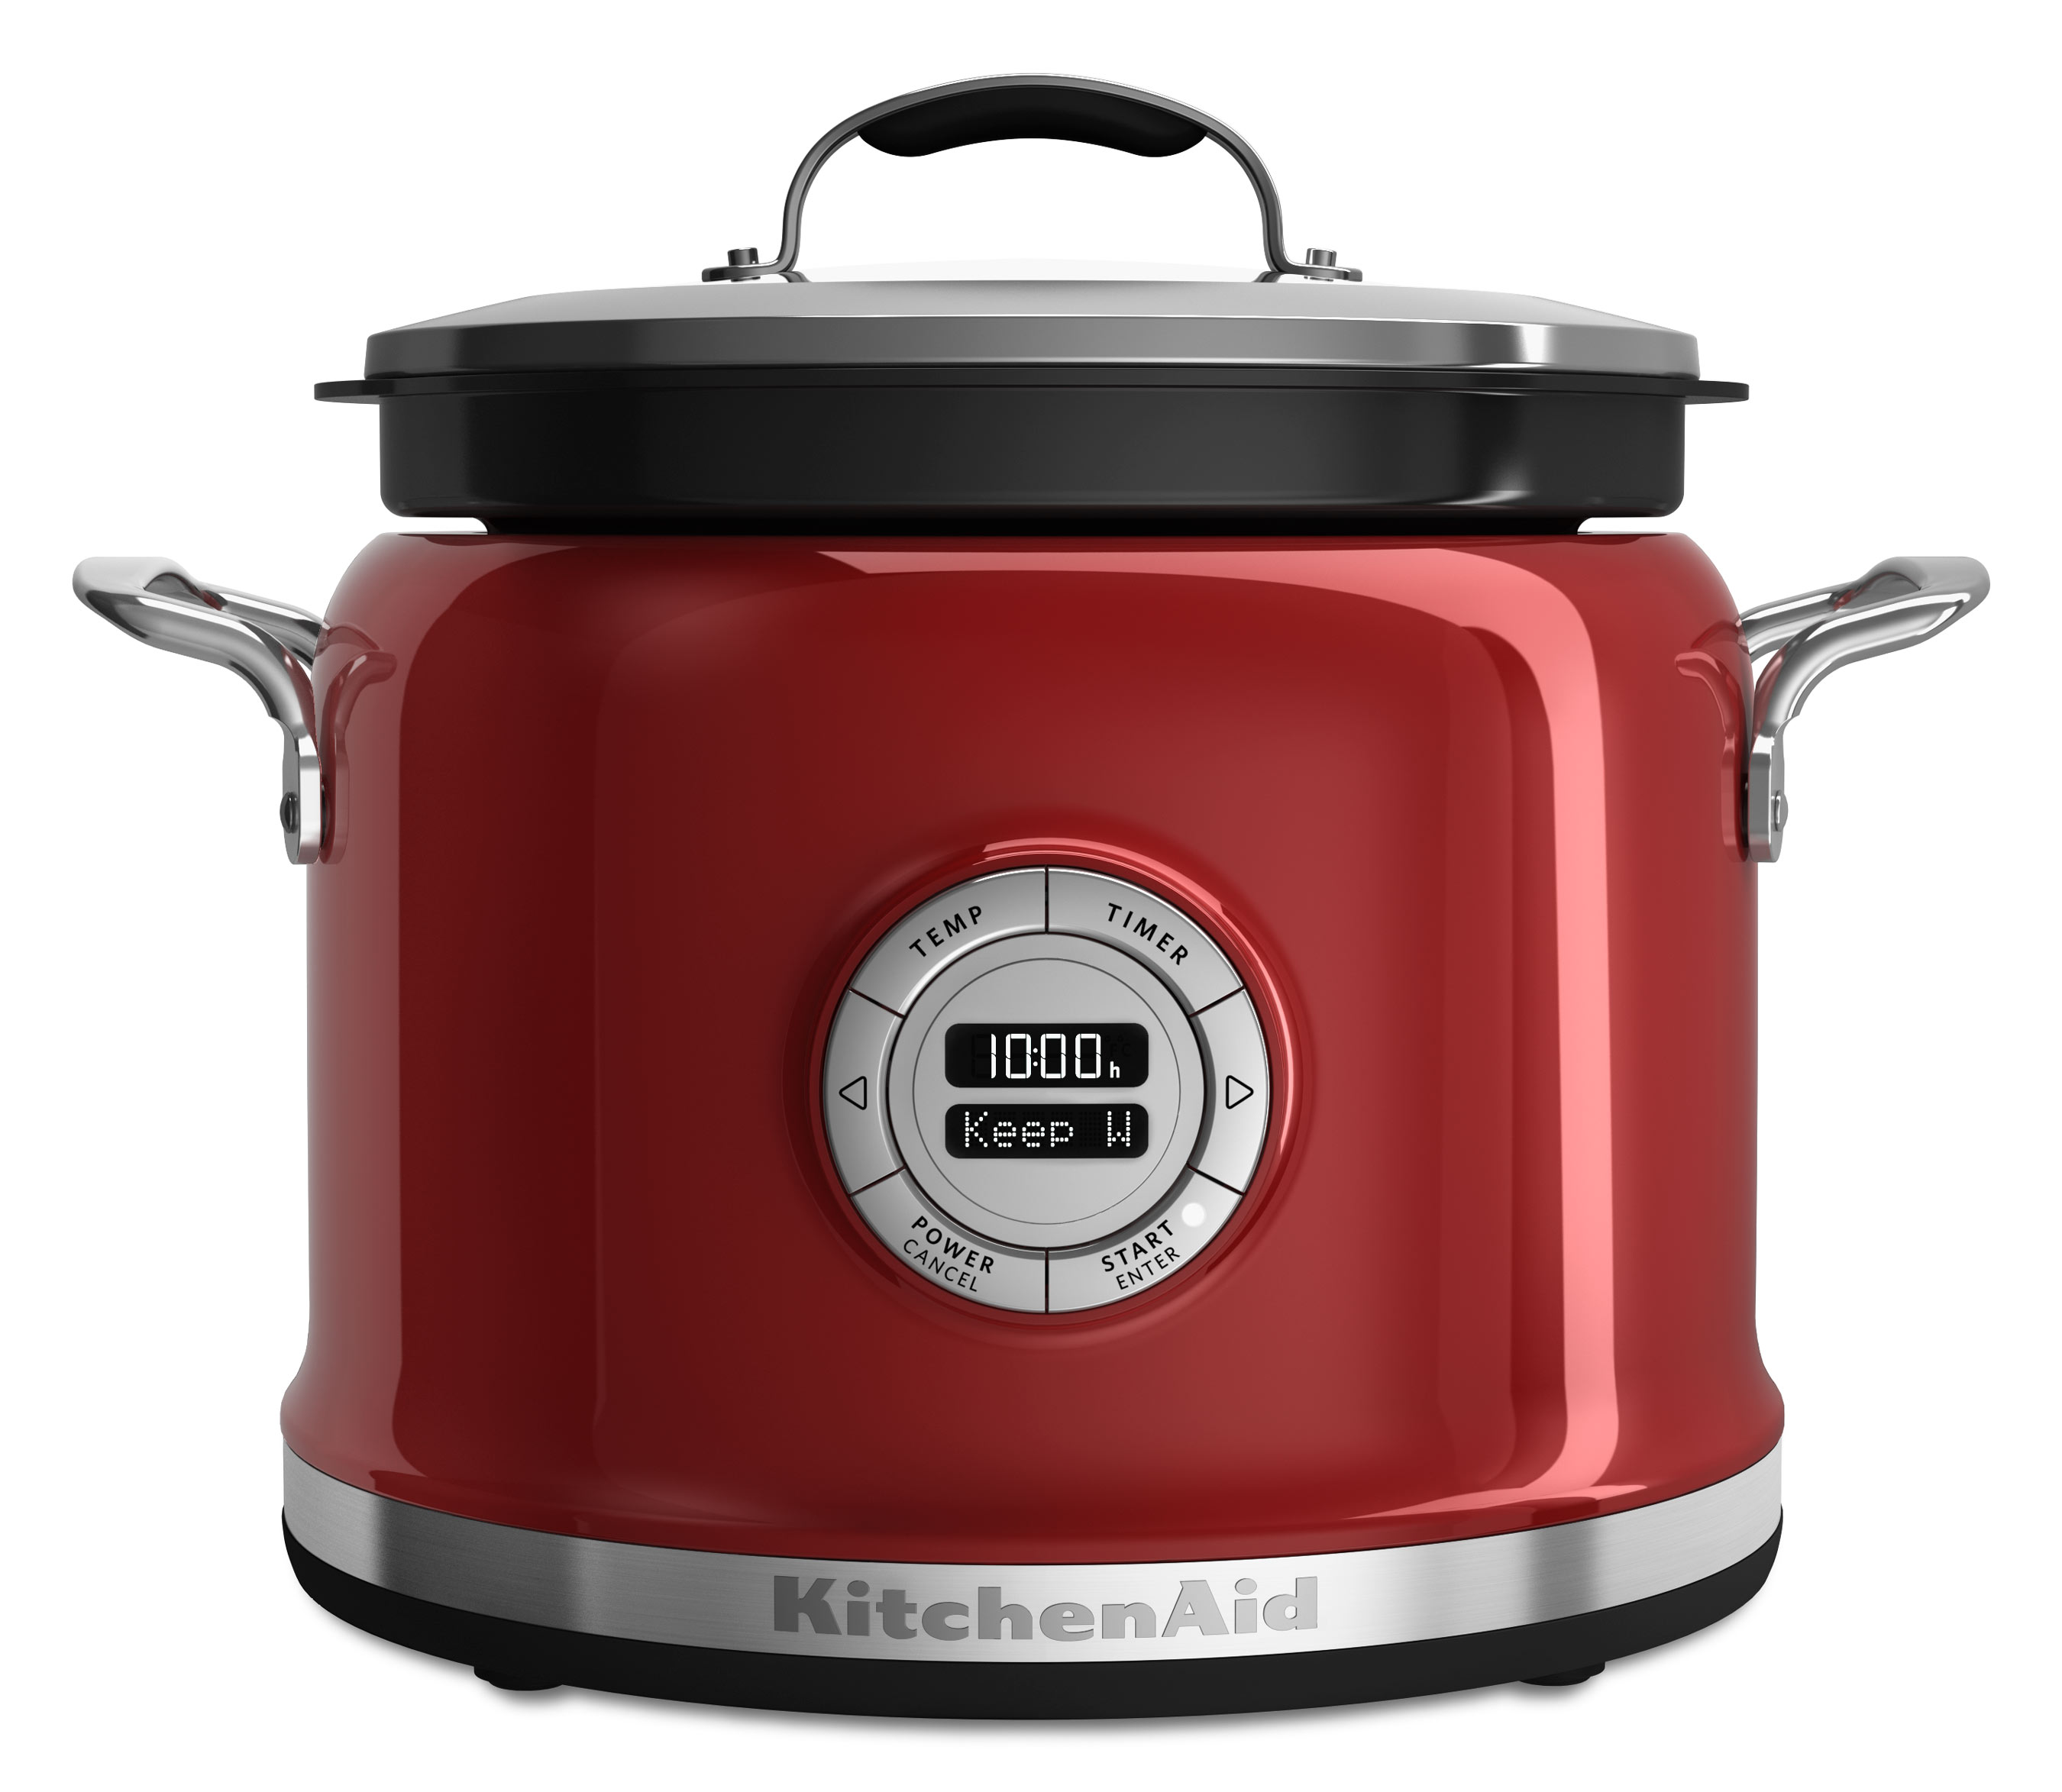 The KitchenAid Multi-Cooker features 10 cooking functions, step-by-step cooking modes and a stirring accessory that allows for assisted cooking at precise temperatures.